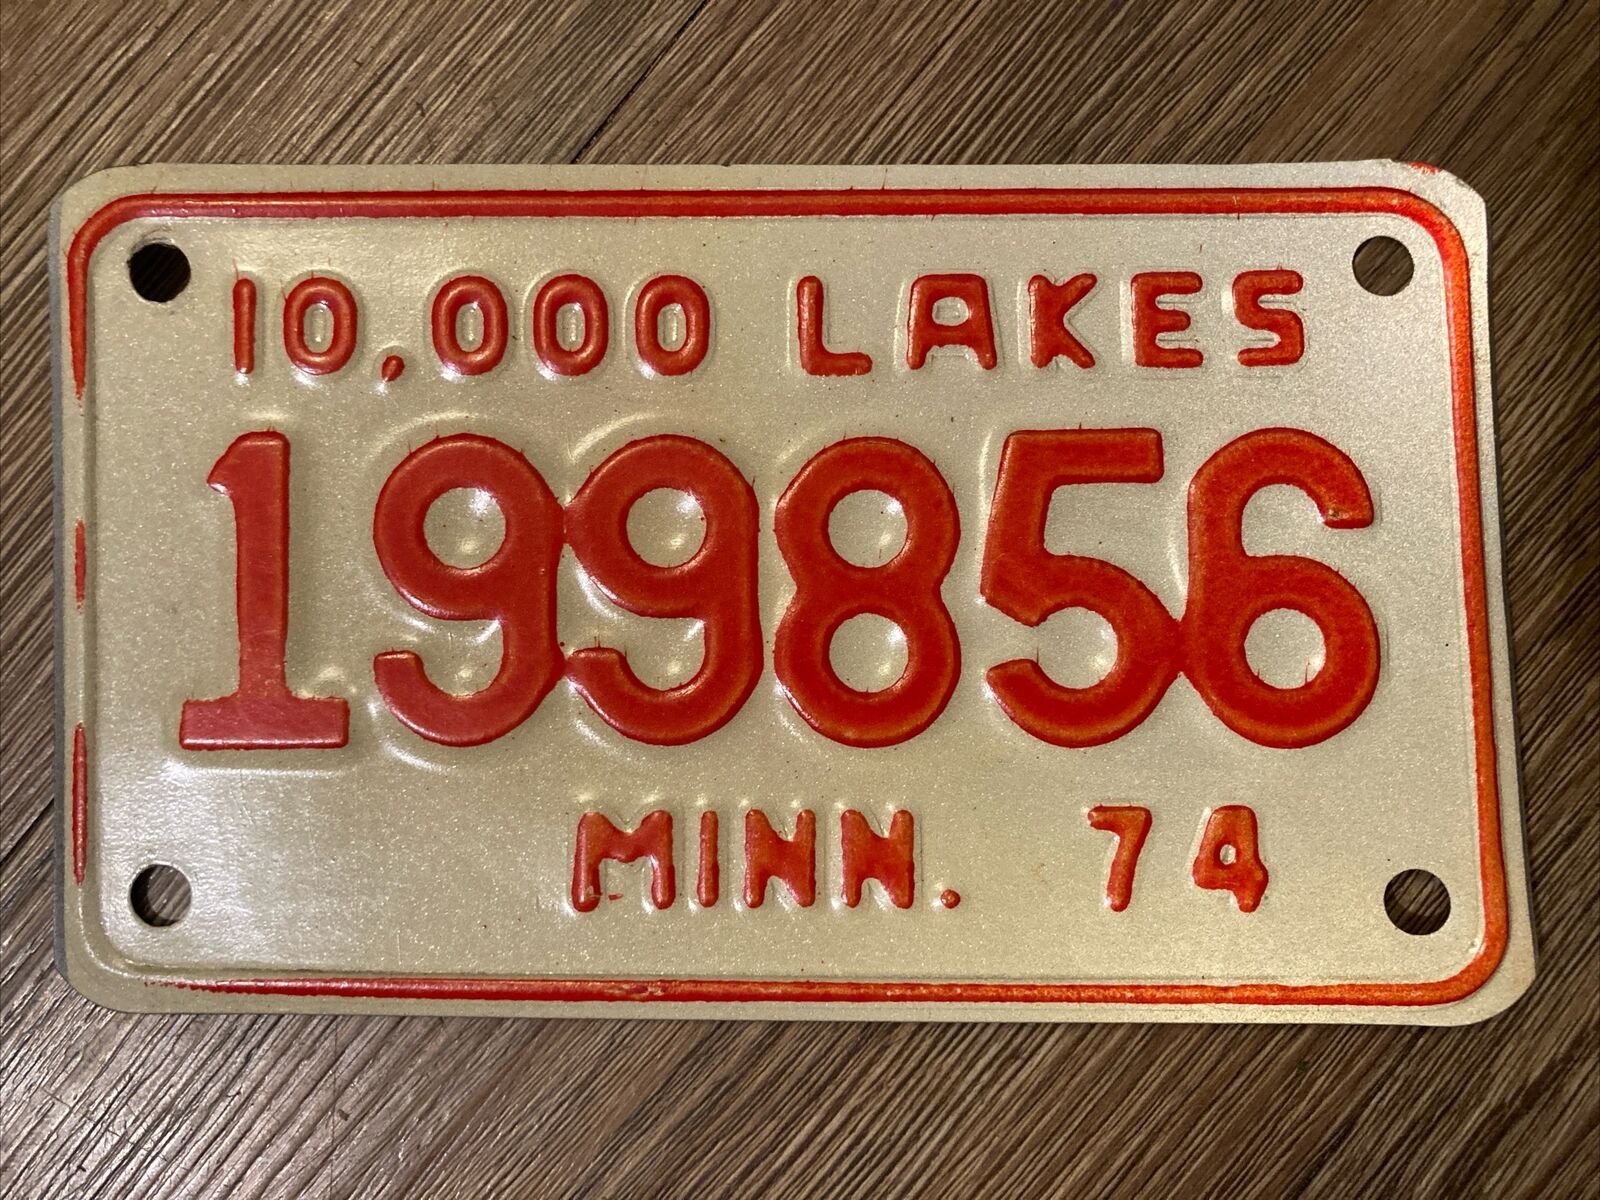 Vintage 1974 Minnesota MN Motorcycle License Plate Man Cave Wall Decor Collector